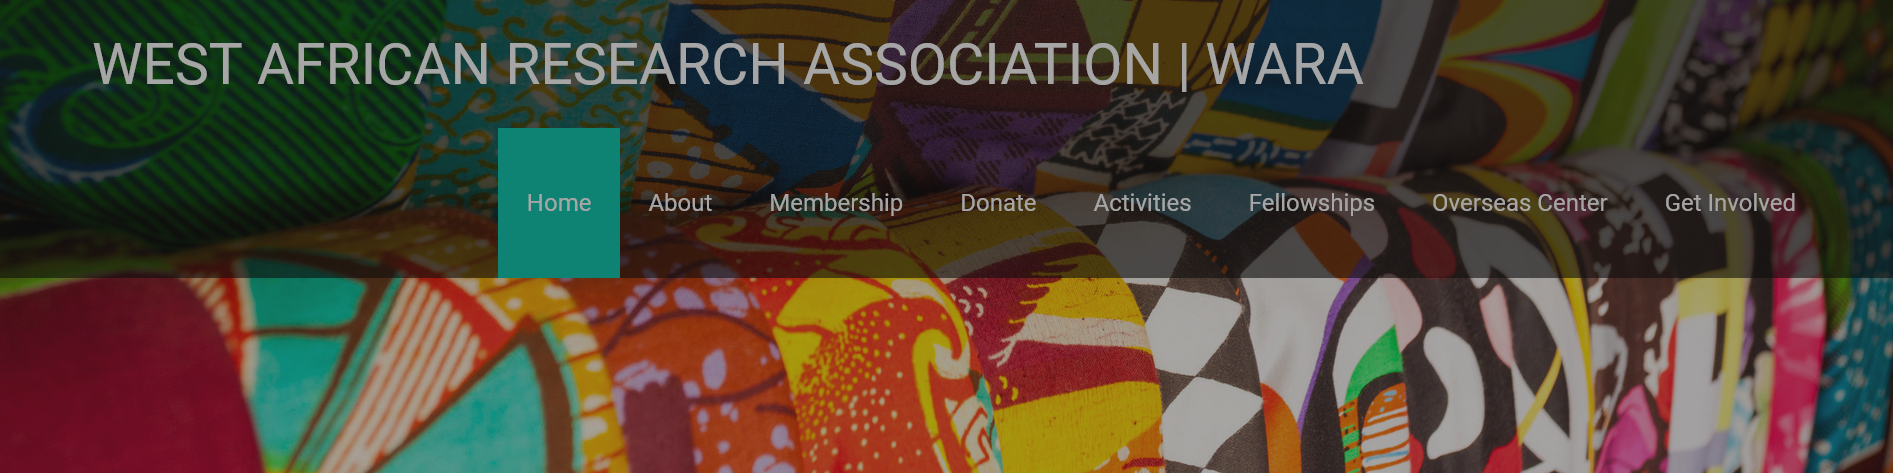 West African Research Association (WARA) Residency Fellowships For West African Scholars